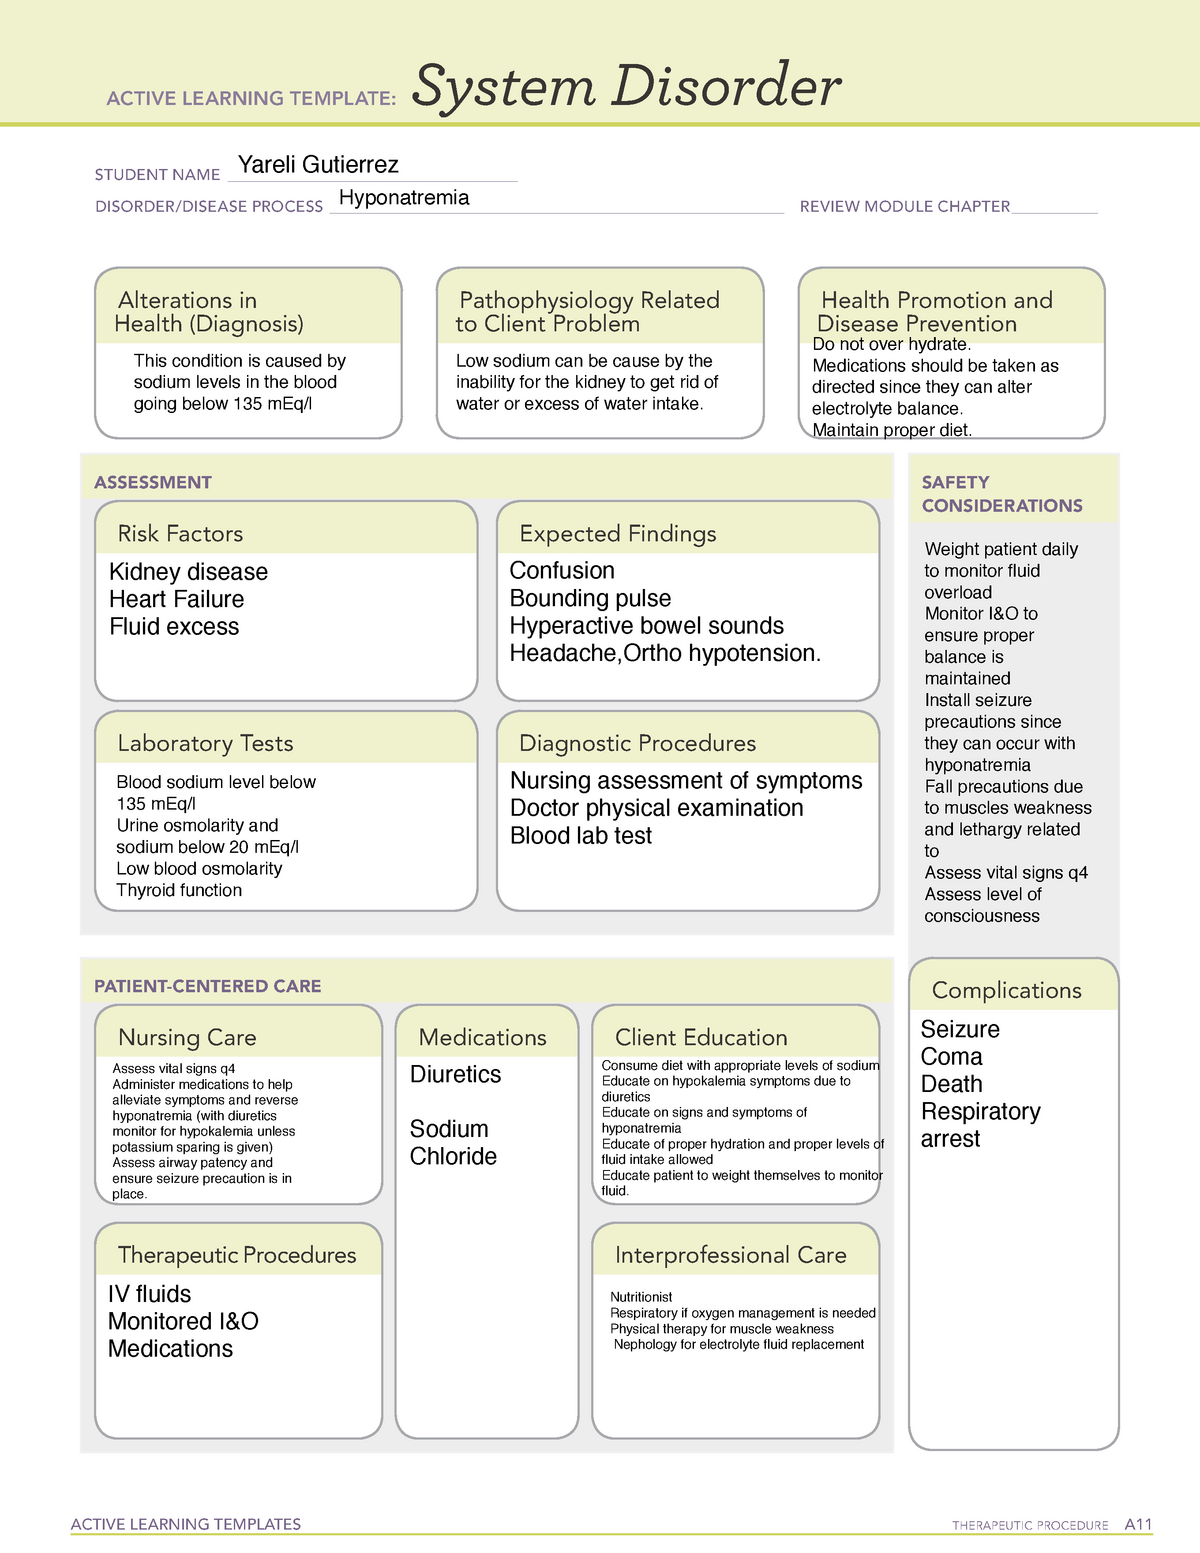 Hyponatremia system disorder ALT worksheet ACTIVE LEARNING TEMPLATES